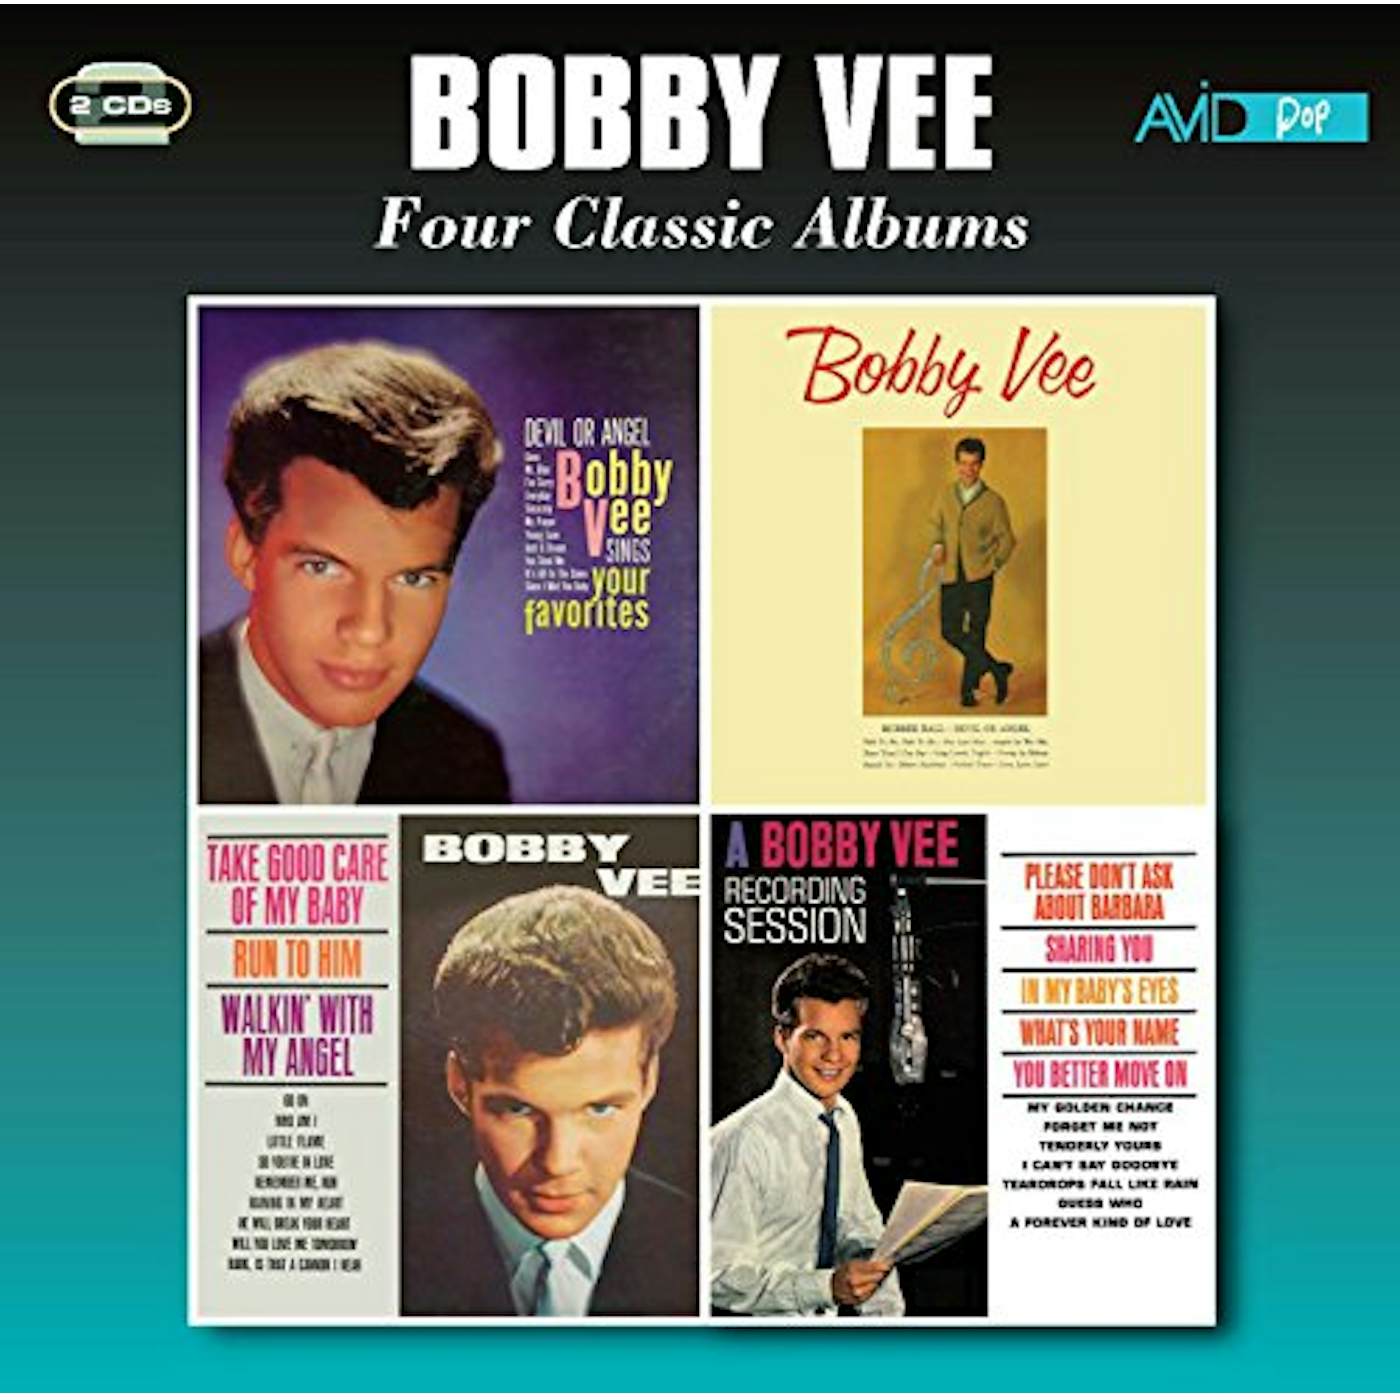 Bobby Vee SINGS YOUR FAVORITES / TAKE GOOD CARE OF MY BABY CD